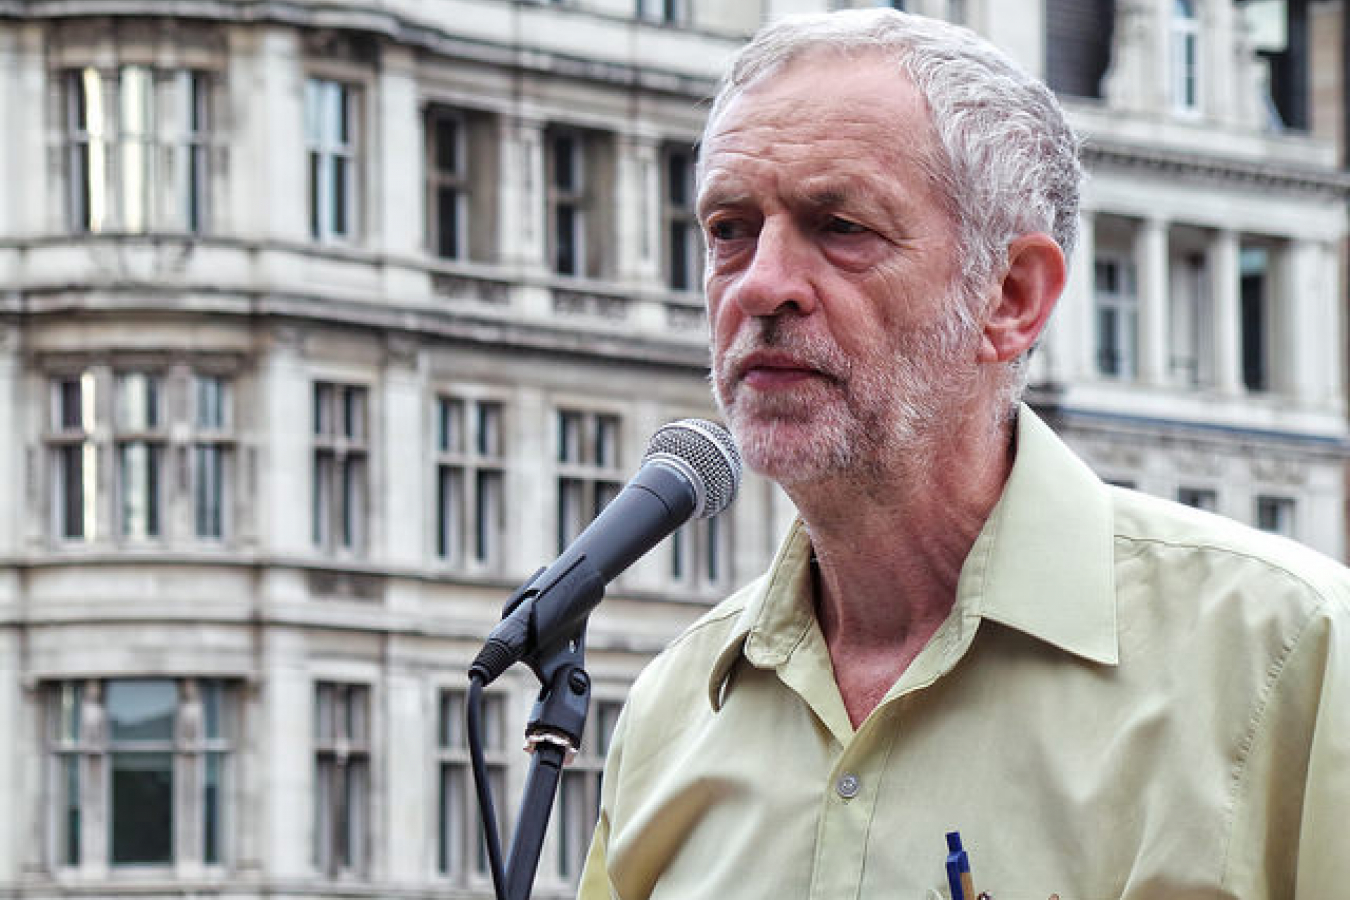 Jeremy Corbyn Labour Party is seen to be more pro Public Services